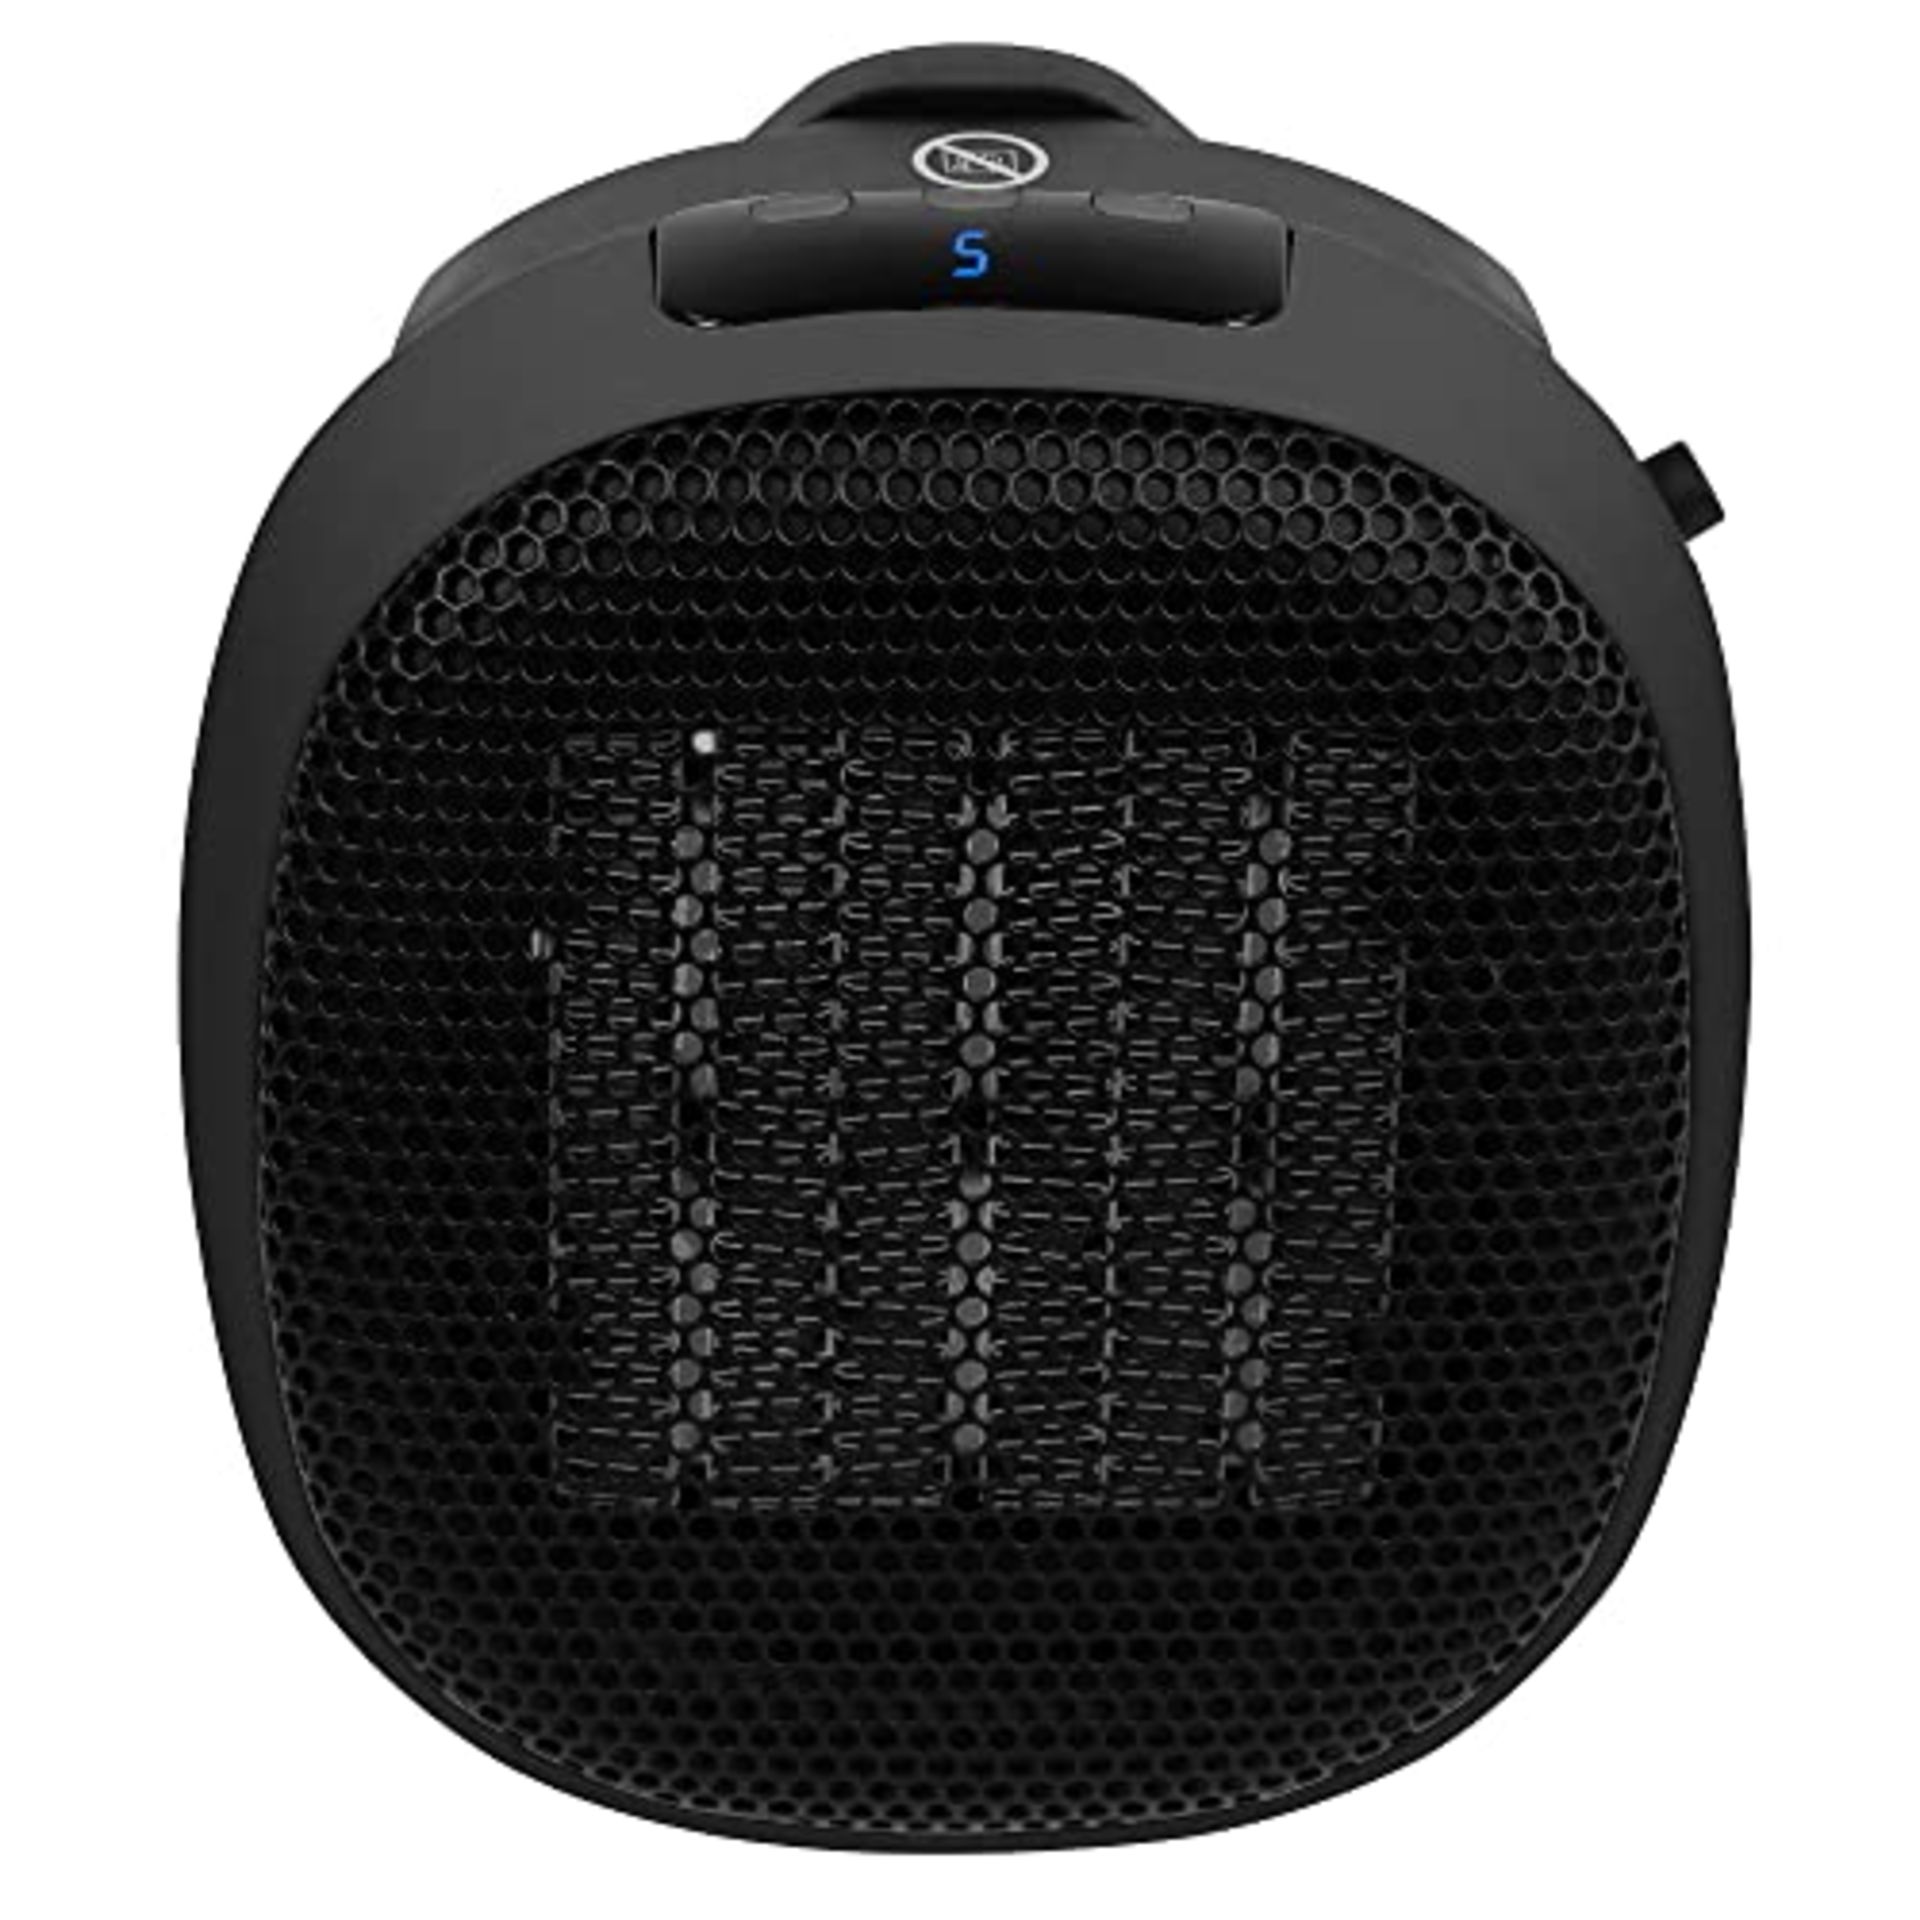 Russell Hobbs RHPH7001 700W Compact Portable Black Ceramic Plug in Fan Heater in Black